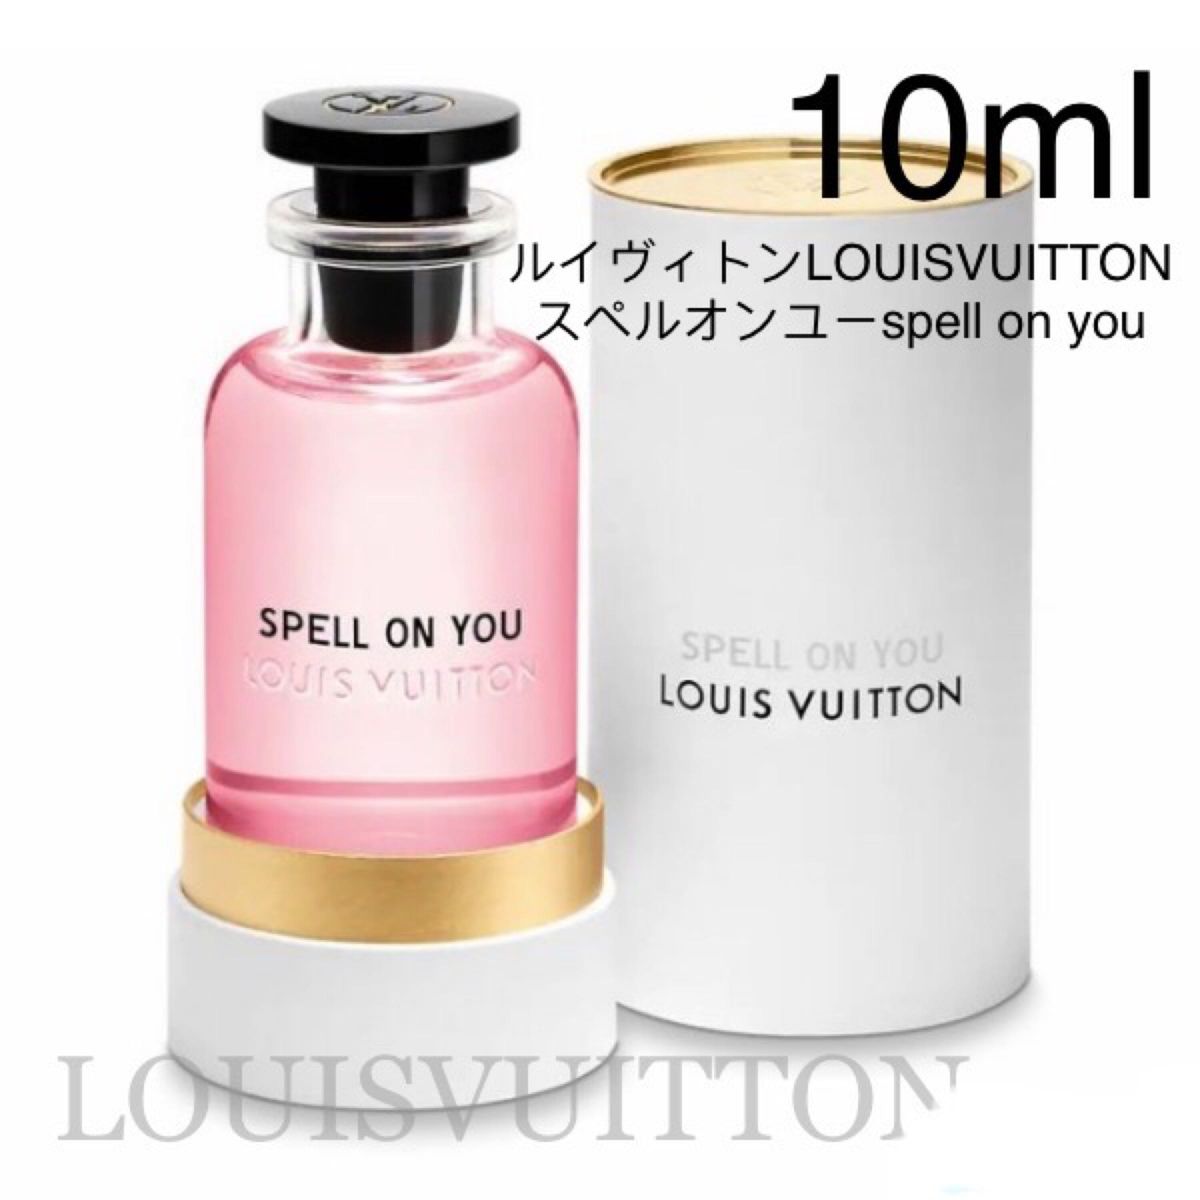 LV ルイヴィトン スペルオンユー SPELL ON YOU EDP 10ml Louis Vuitton